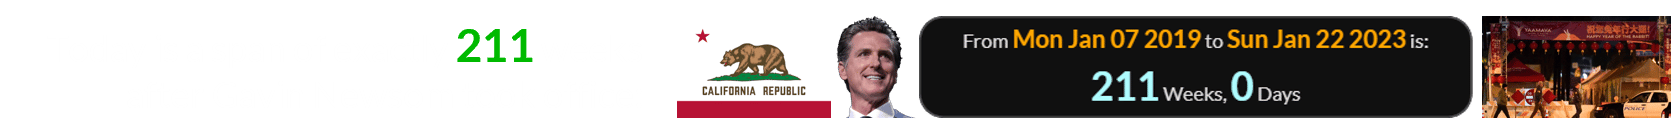 Today is a span of exactly 211 weeks after Gavin Newsom took office: